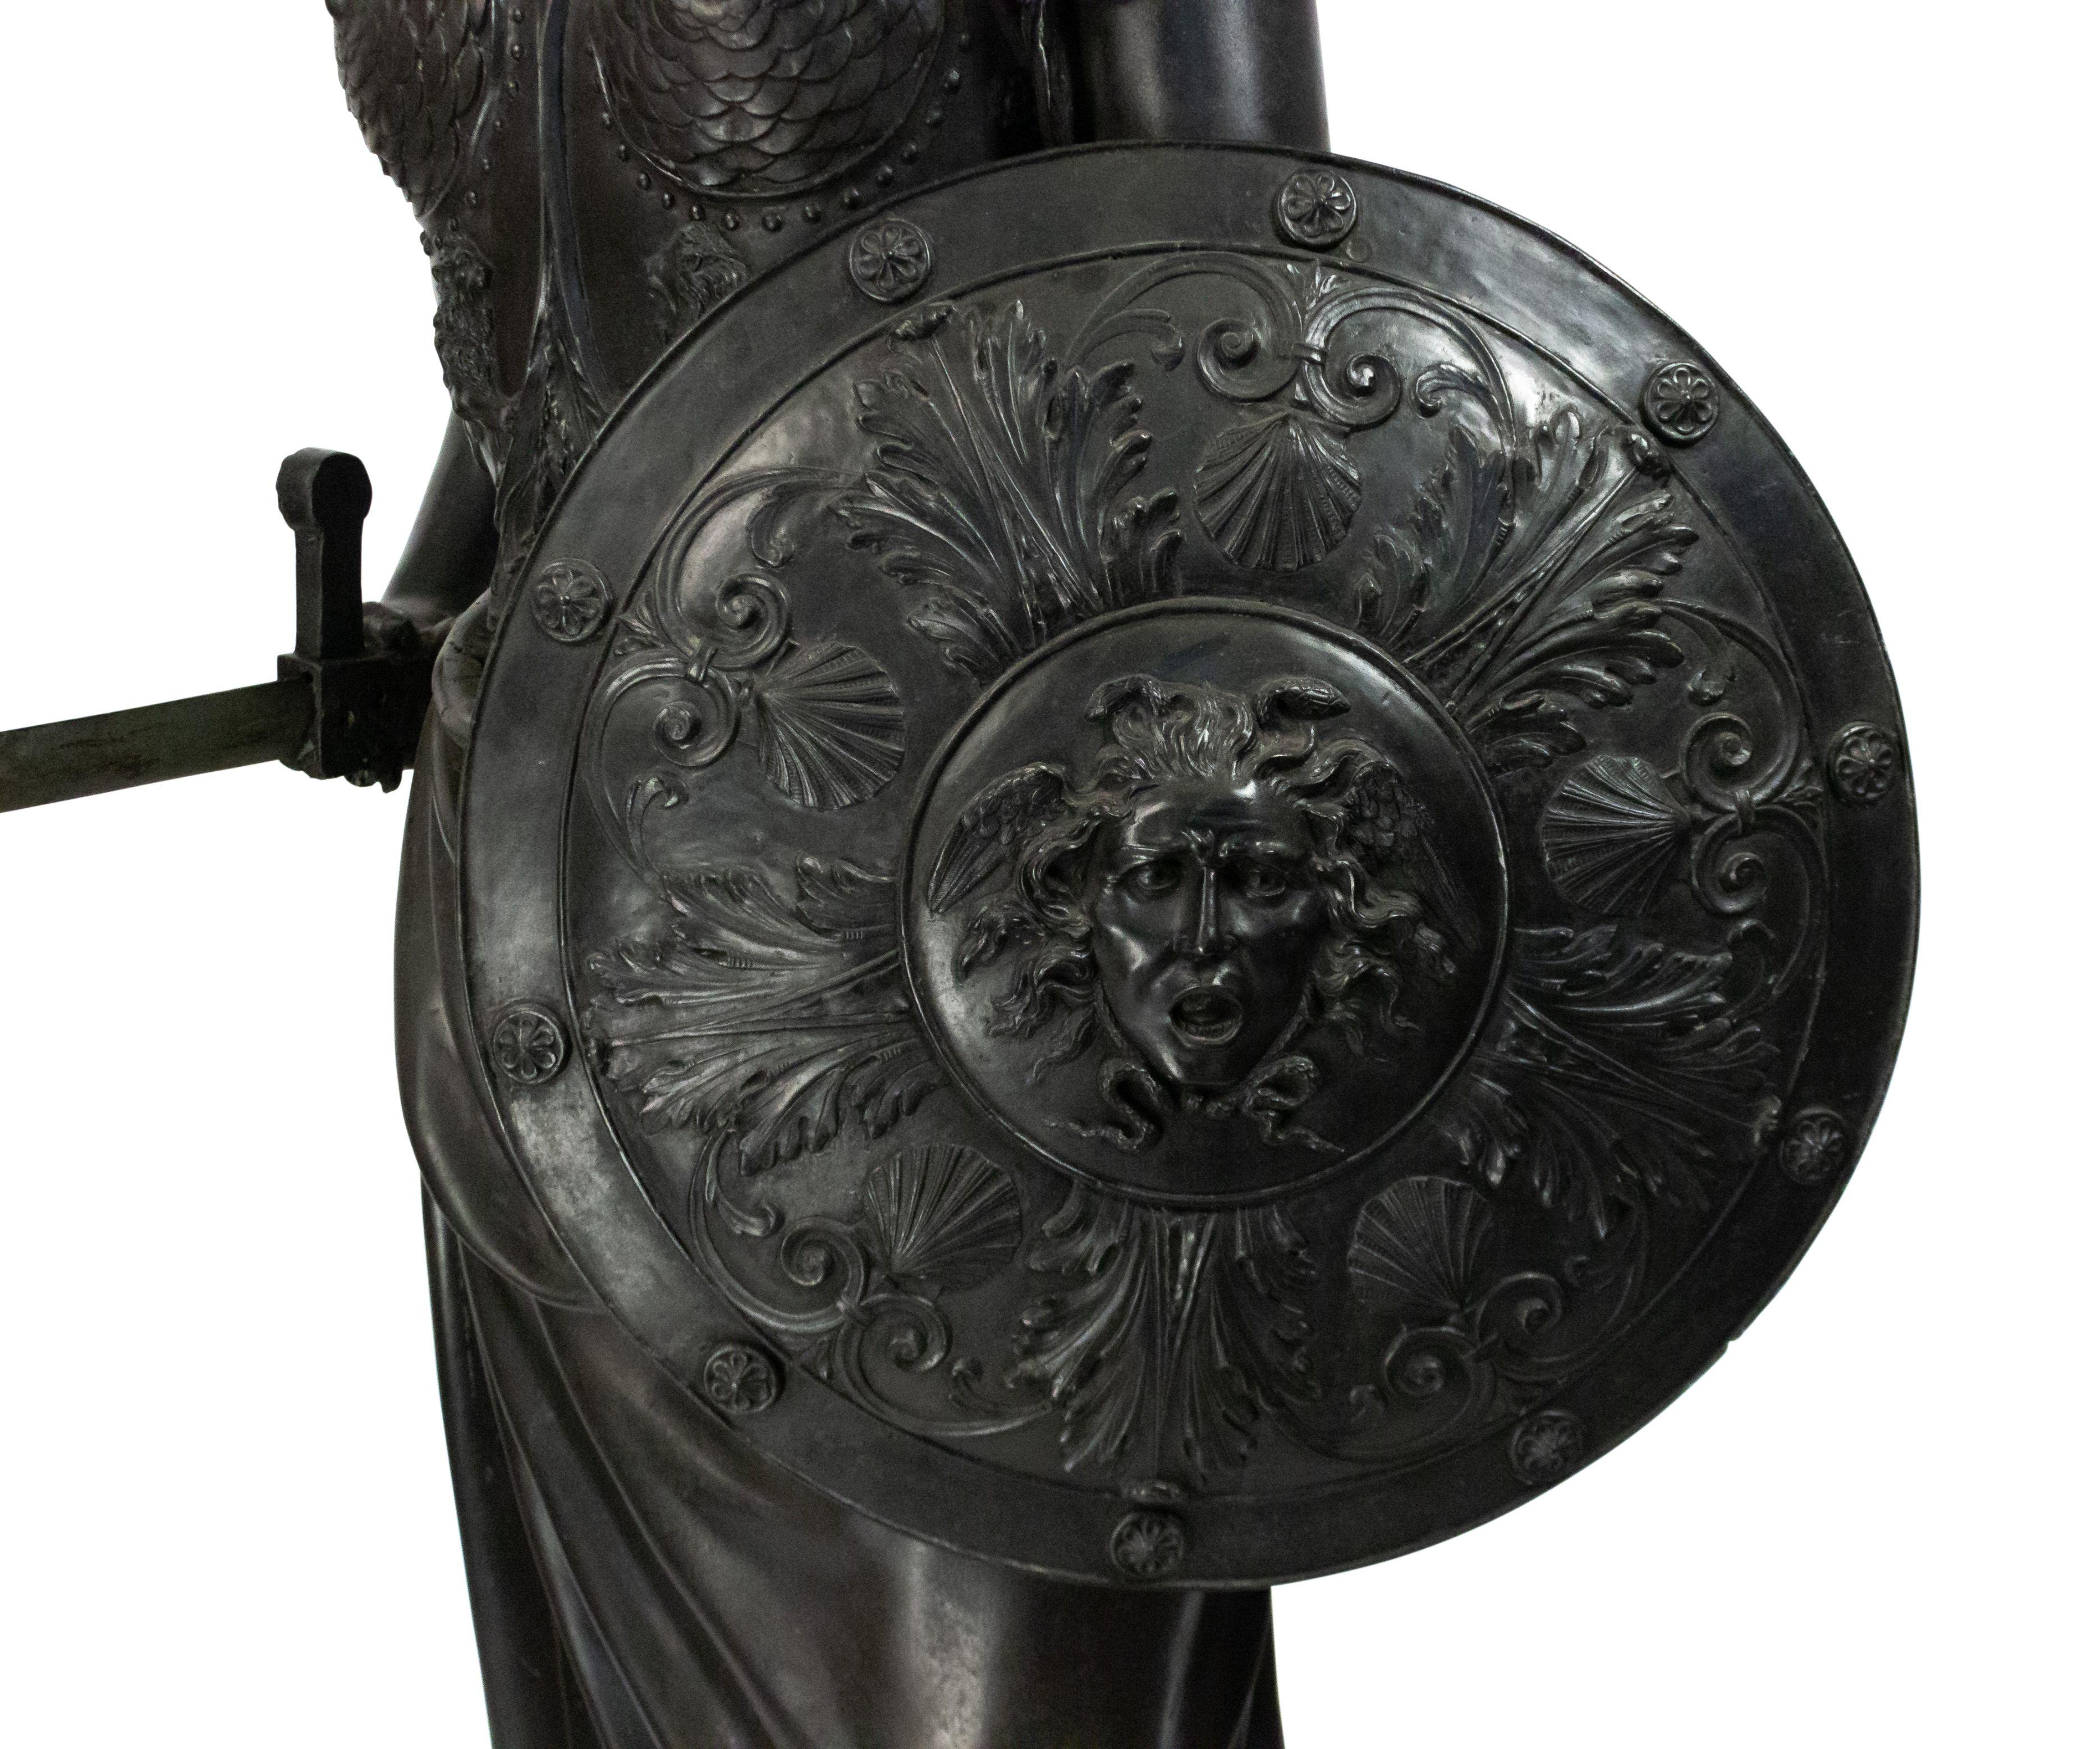 19th Century Grecian-style bronze life-size figure of classic woman with military wardrobe holding a round decorated shield and a sword (sword replaced with wooden model).
